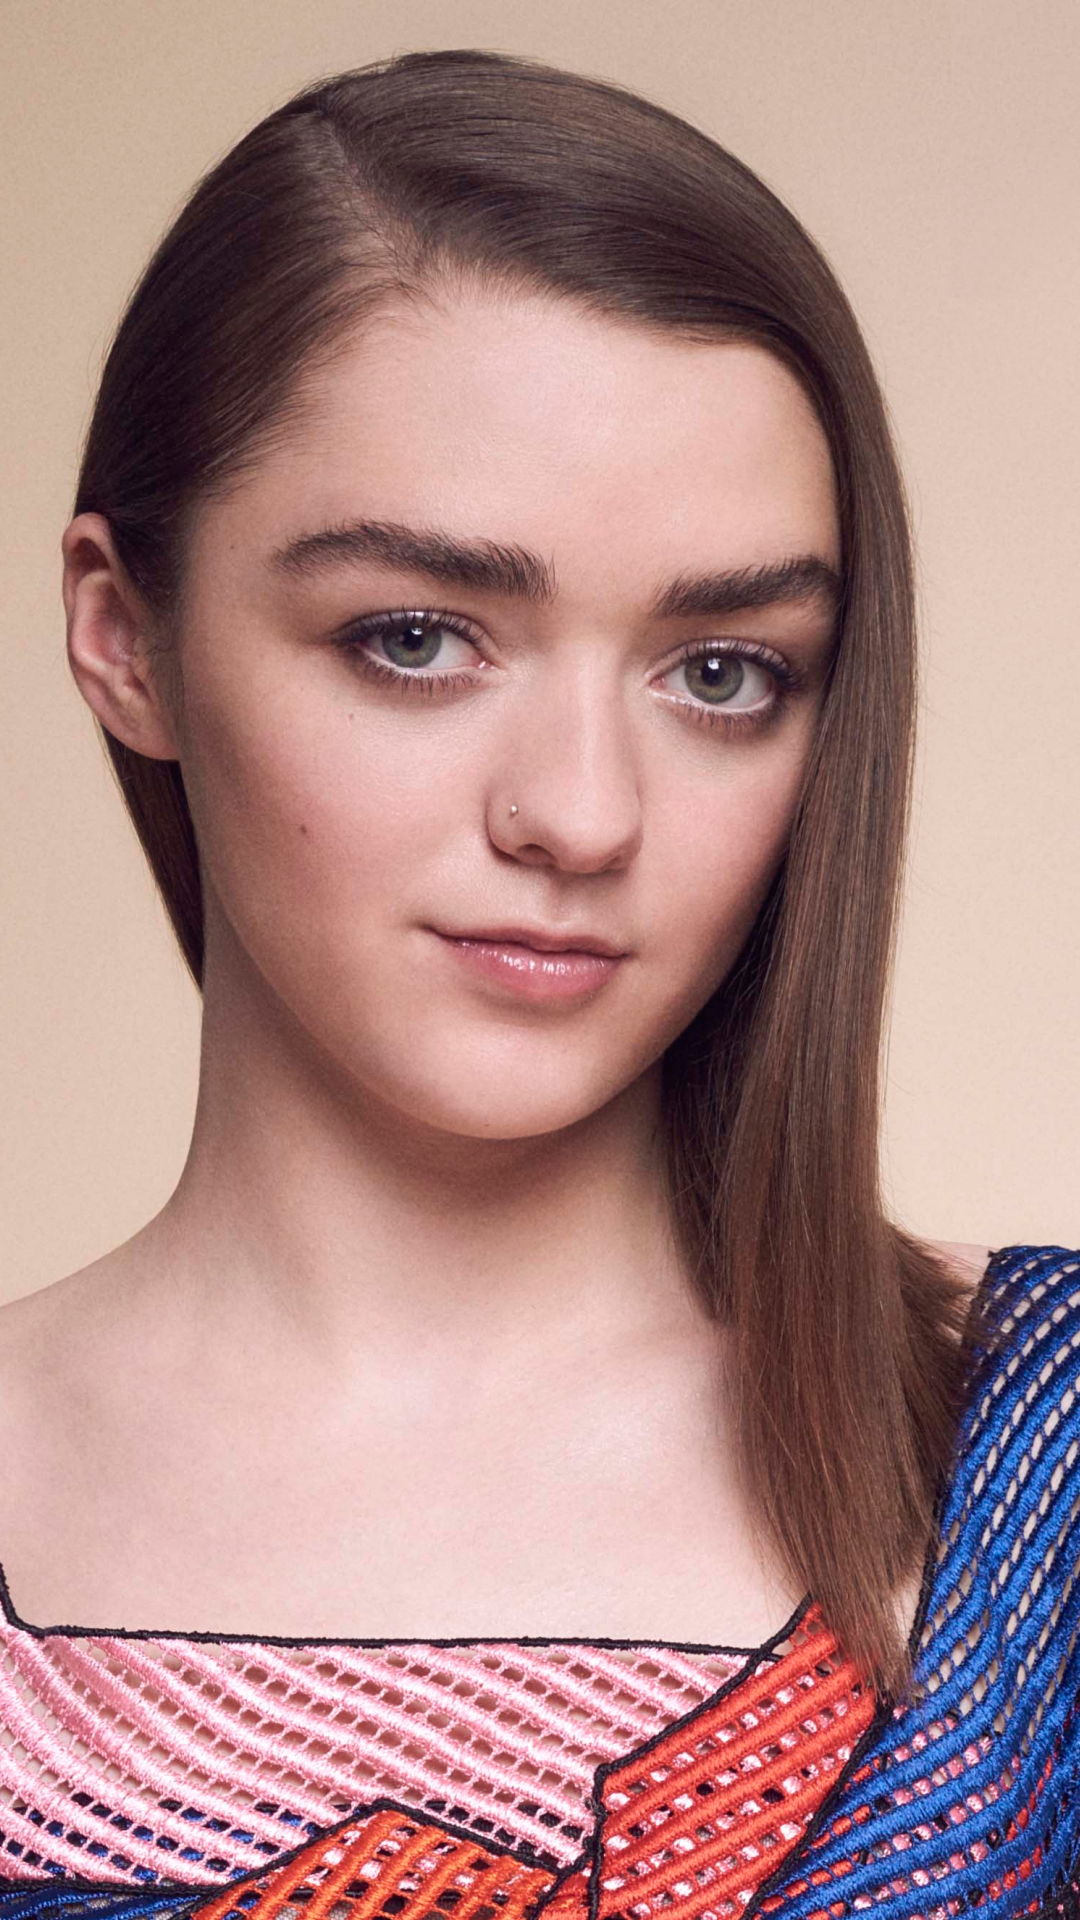 1080x1920 2019 Maisie Williams Iphone 7, 6s, 6 Plus and Pixel XL ,One ...